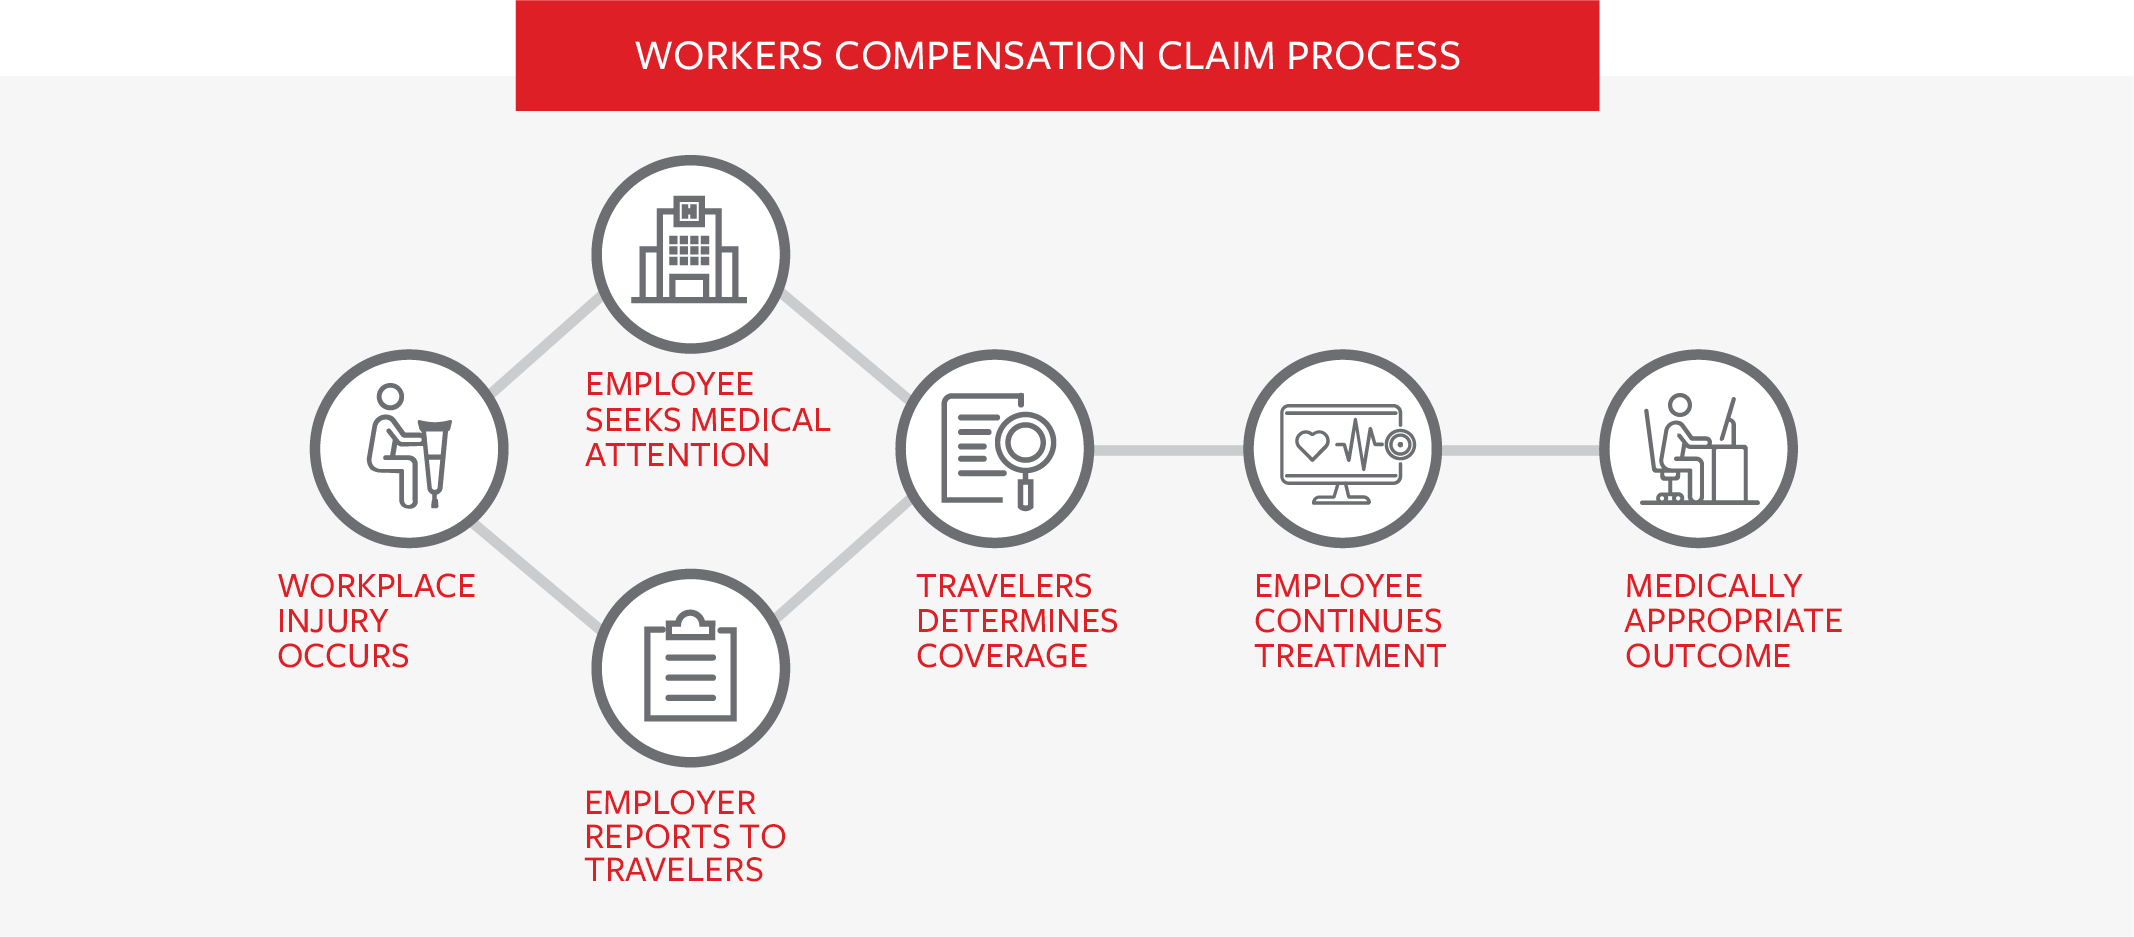 Workers Compensation Claim Process. Workplace Injury Occurs - Employee Seeks Medical Attention - Employer Reports To Travelers - Travelers Determines Coverage - Employee continues Treatment - Medically Appropriate Outcome